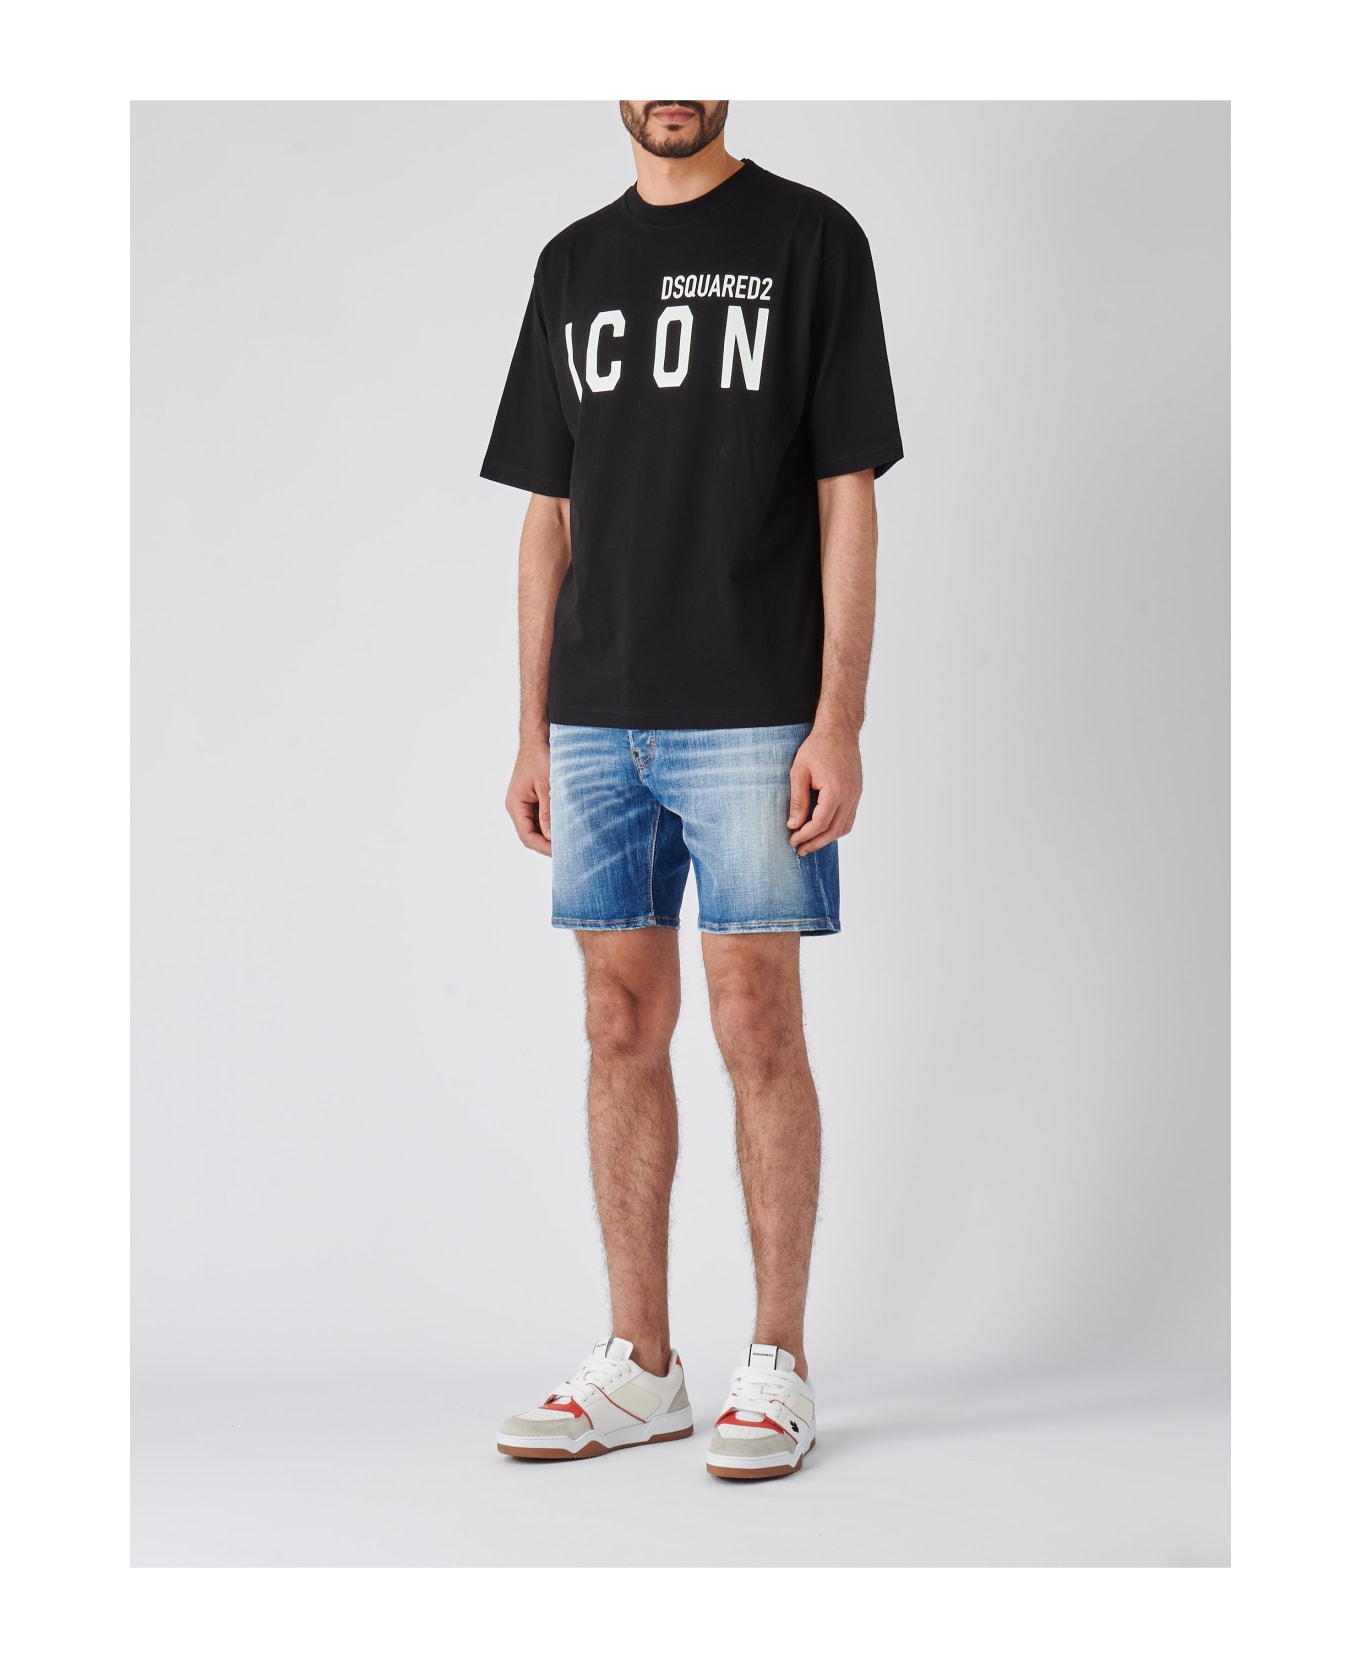 Dsquared2 Be Icon Loose Fit Tee T-shirt - NERO シャツ